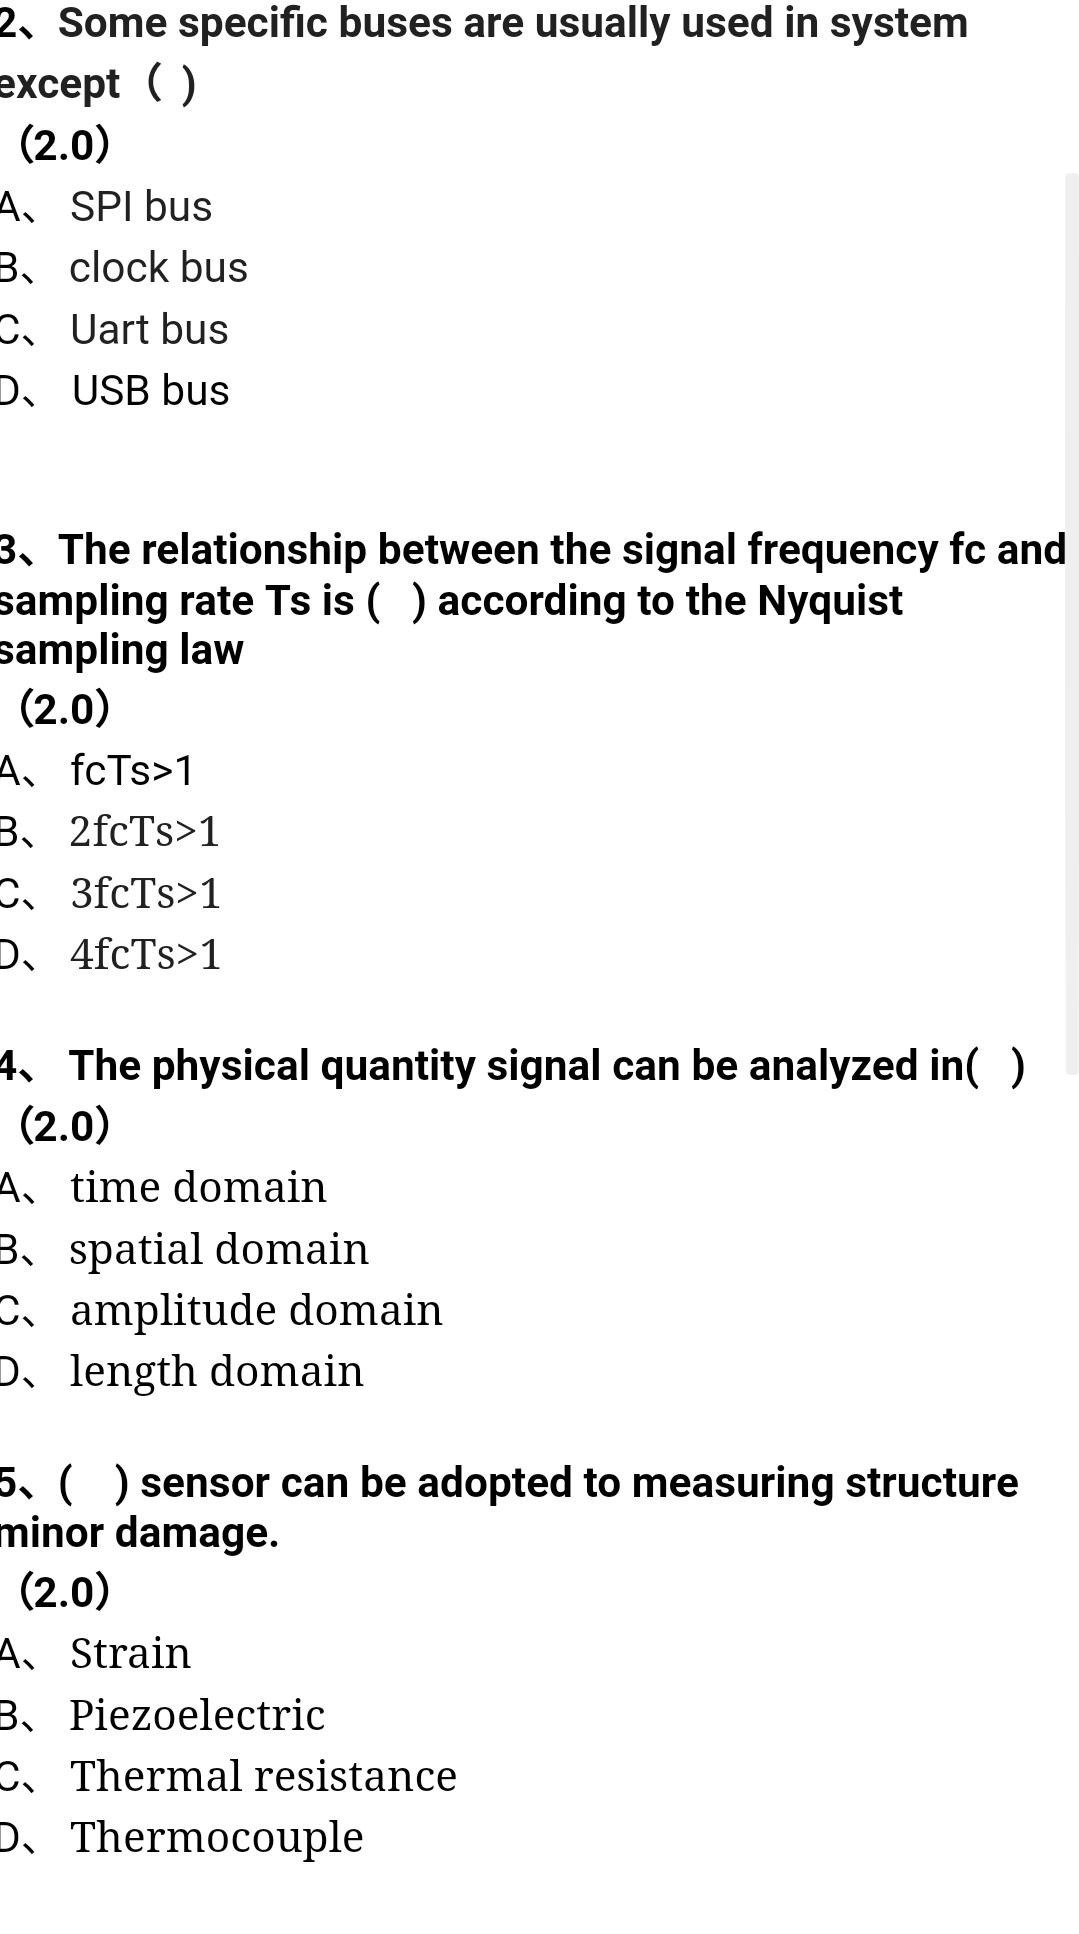 2. Some specific buses are usually used in system
except ()
(2.0)
A SPI bus
3. clock bus
CUart bus
D. USB bus
3. The relationship between the signal frequency fc and
sampling rate Ts is () according to the Nyquist
sampling law
(2.0)
A. fcTs>1
B、 2fcTs>1
C3fcTs>1
D. 4fcTs>1
4. The physical quantity signal can be analyzed in()
(2.0)
A、 time domain
B. spatial domain
Camplitude domain
D、 length domain
5. ( ) sensor can be adopted to measuring structure
minor damage.
(2.0)
A. Strain
B、 Piezoelectric
C、 Thermal resistance
D. Thermocouple